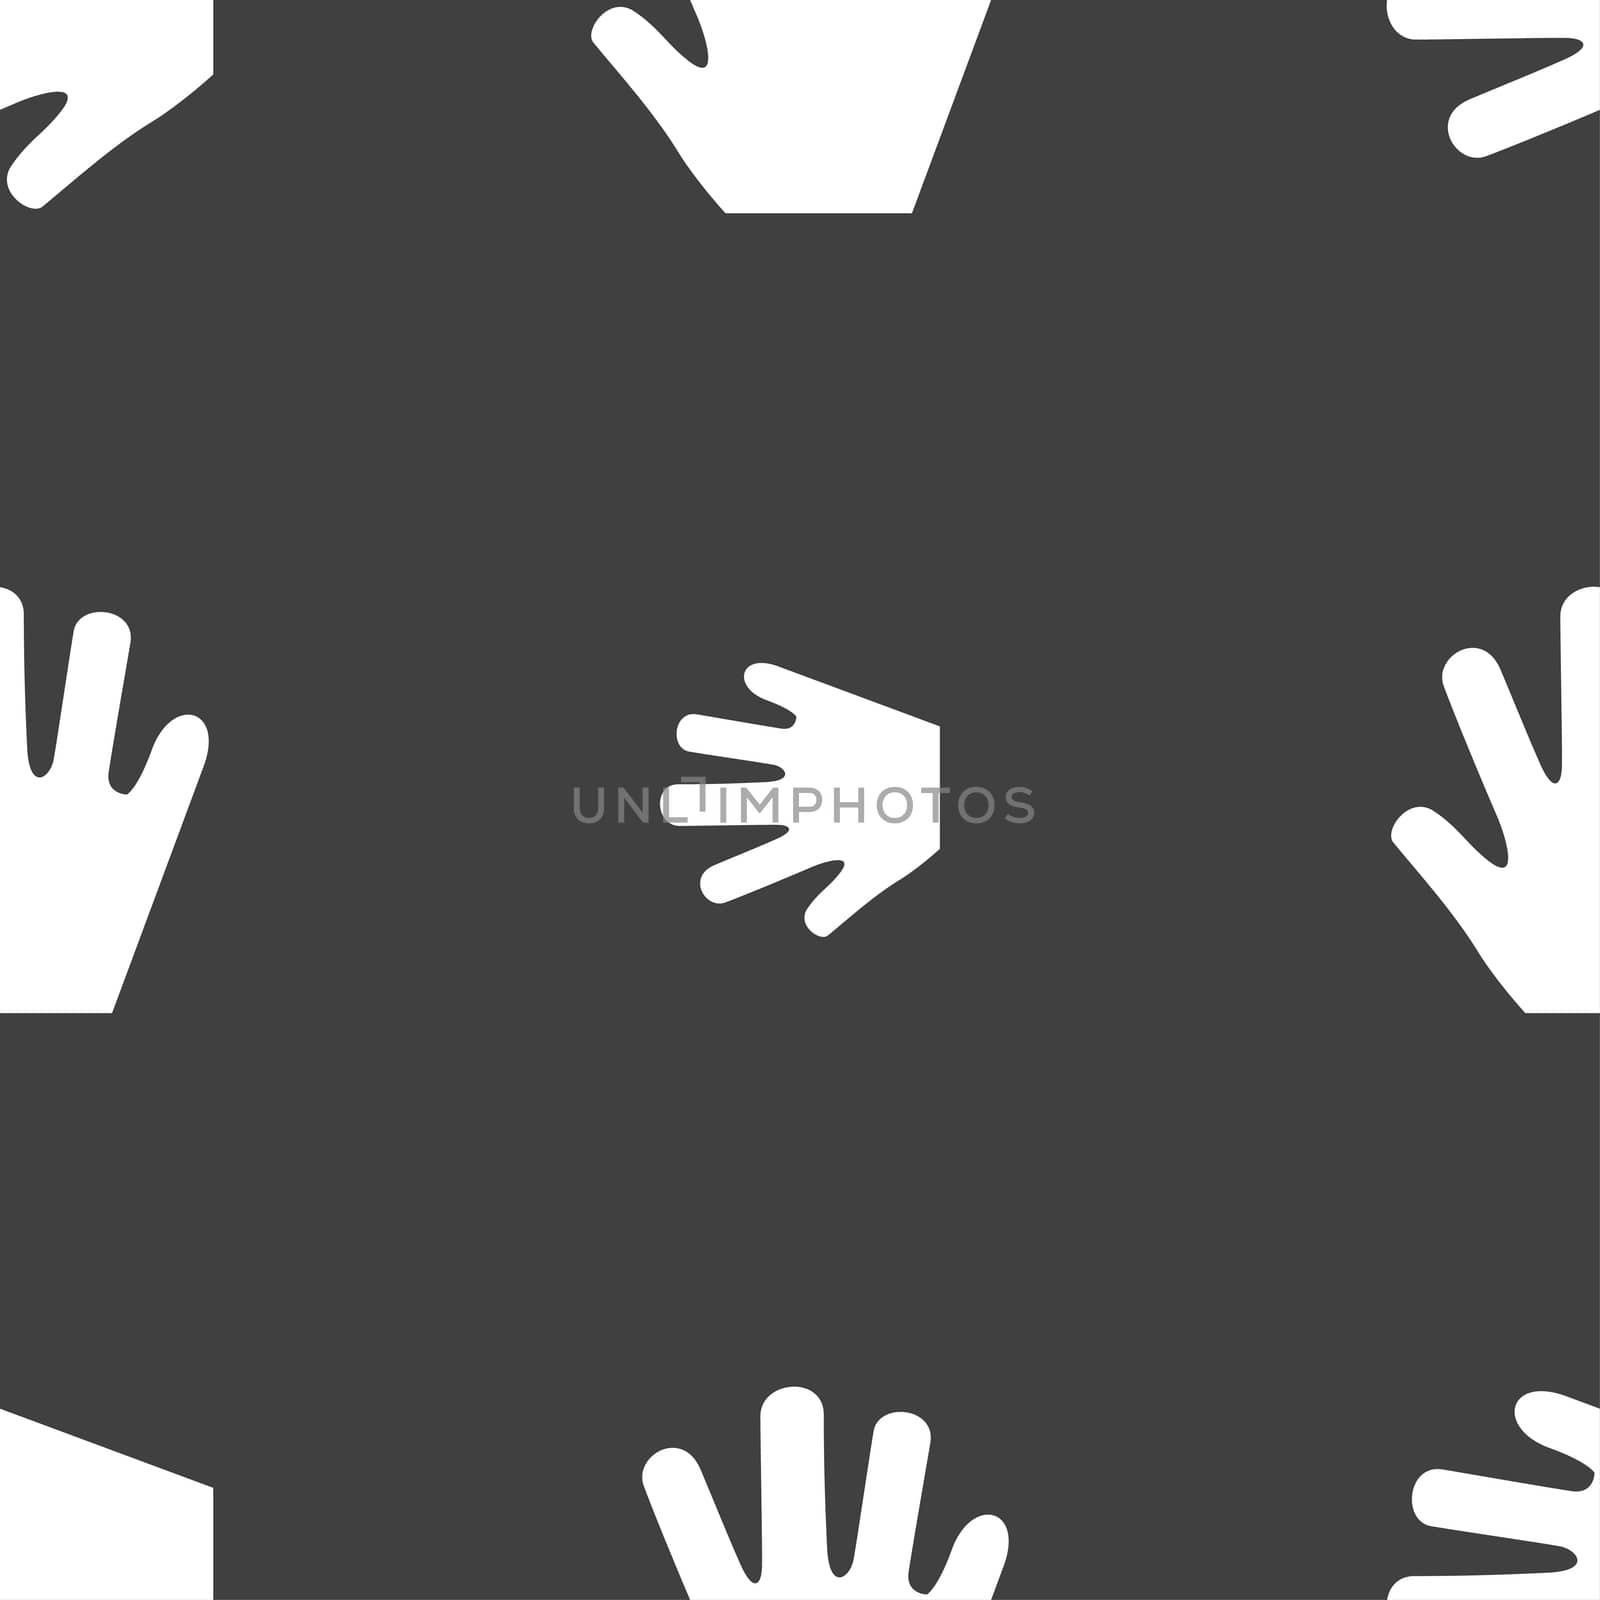 Hand icon sign. Seamless pattern on a gray background. illustration